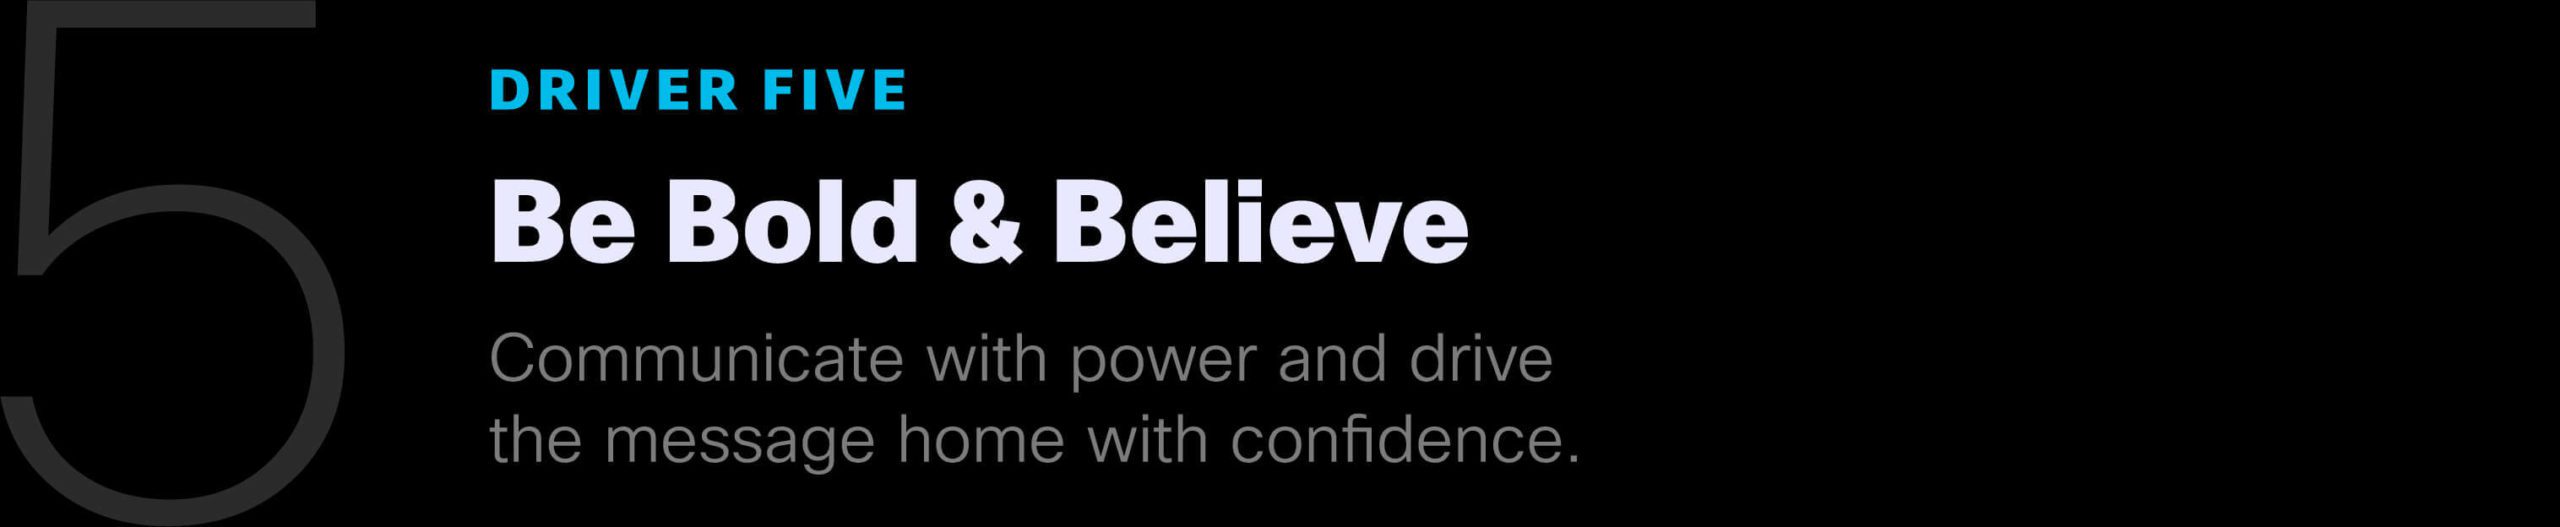 Driver Five: Be Bold & Believe. Communicate the power and drive the message home with confidence.